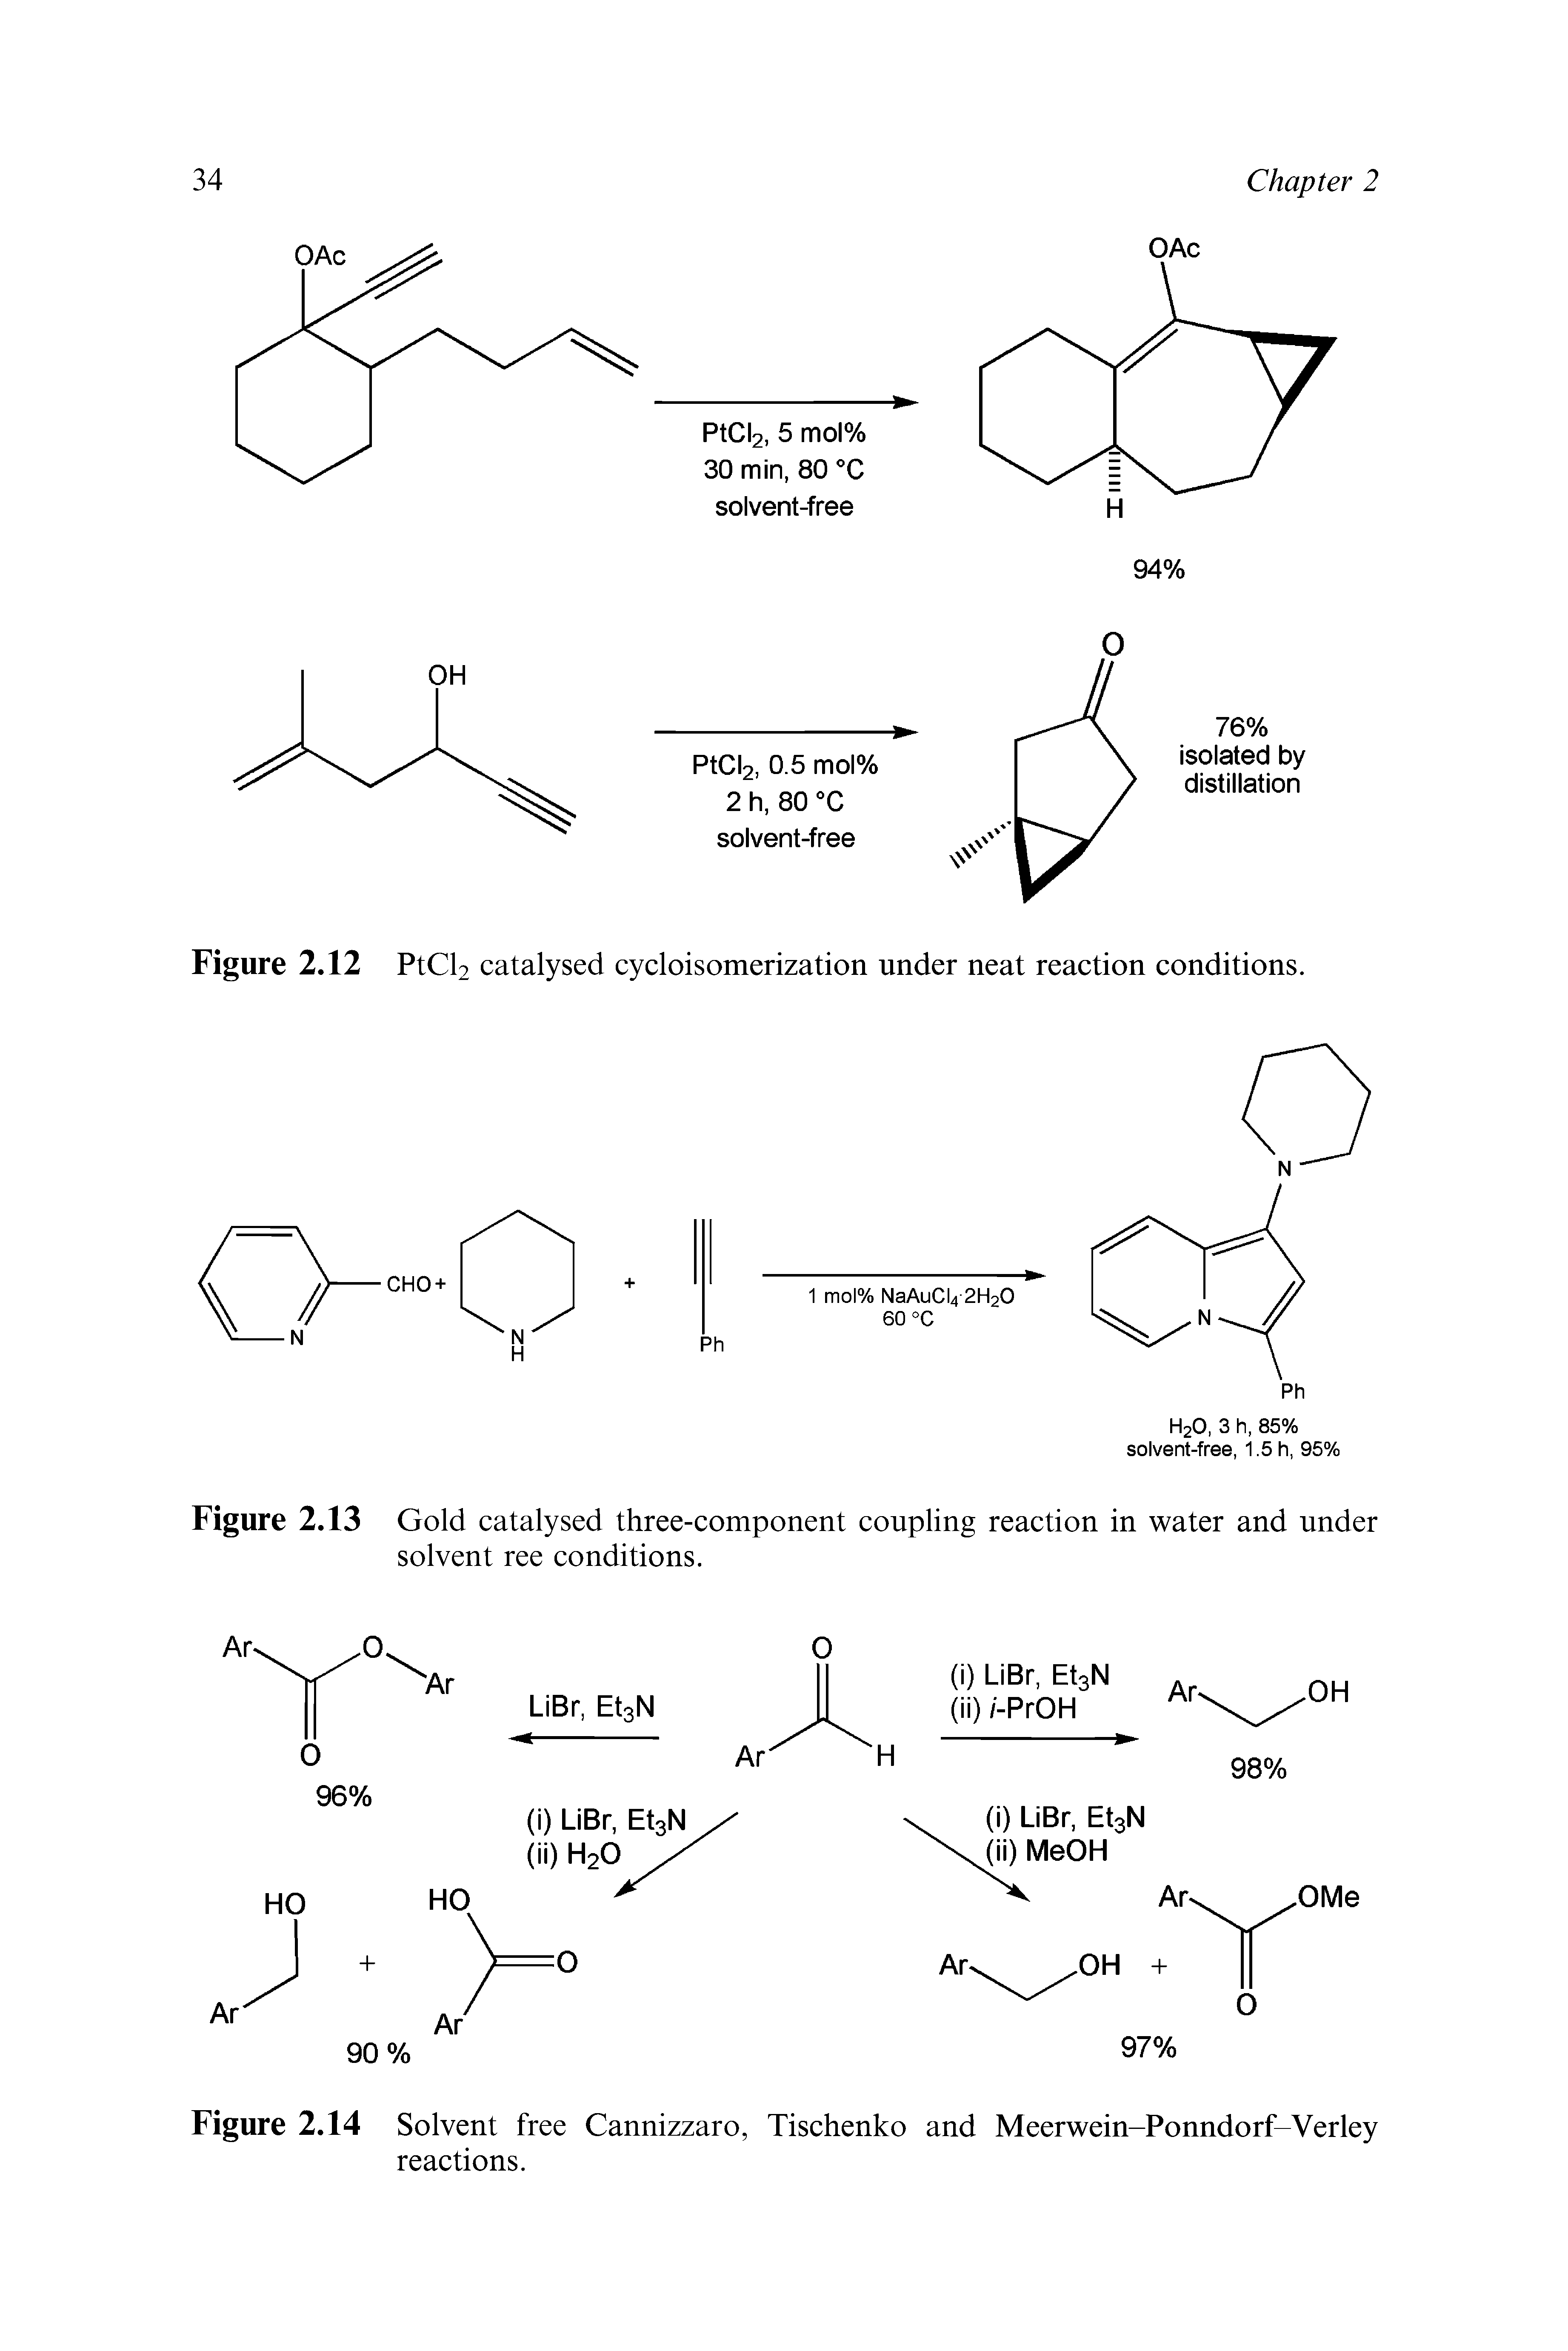 Figure 2.12 PtCl2 catalysed cycloisomerization under neat reaction conditions.